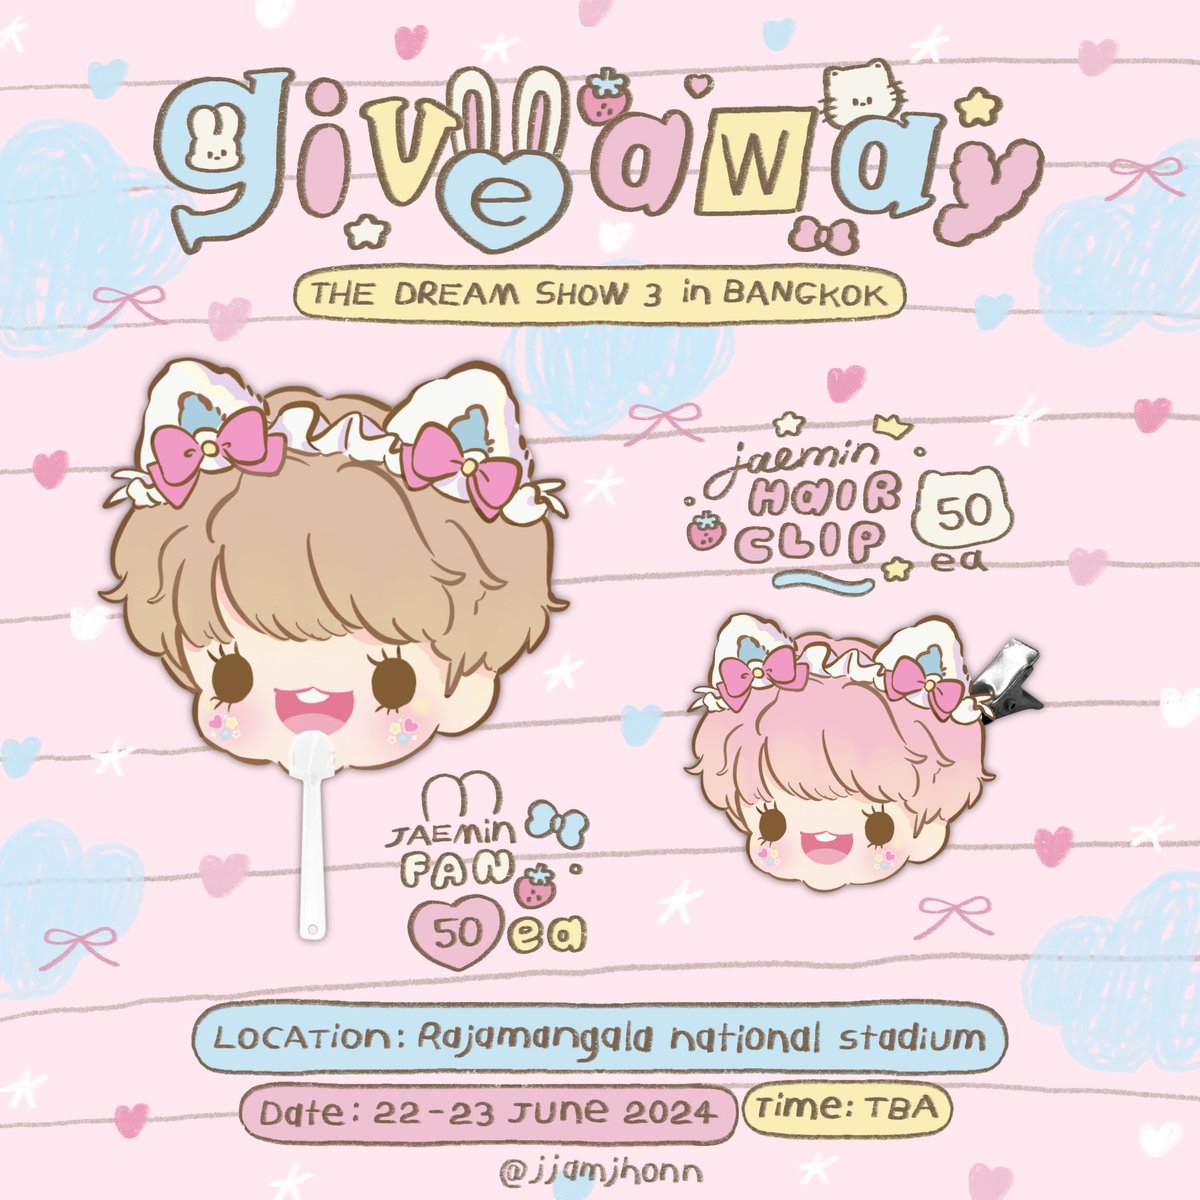 🎀✨ pls kindly rt ·͜·♡ ᙏ̤̫ ㅡ jaemin fan •⩊• ྀིྀིྀིྀིྀི ㅡ jaemin hair clip ❥ ㅡ 𝒓𝒖𝒍𝒆 : 𝒓𝒆𝒕𝒘𝒆𝒆𝒕 𝒂𝒏𝒅 𝒔𝒉𝒐𝒘 𝒕𝒉𝒊𝒔 𝒕𝒘𝒆𝒆𝒕 𓍯 date : 22-23.06.2024 𓍯 rajamangala national stadium #NCTDREAM_THEDREAMSHOW3_in_BKK #THEDREAMSHOW3_in_BKK